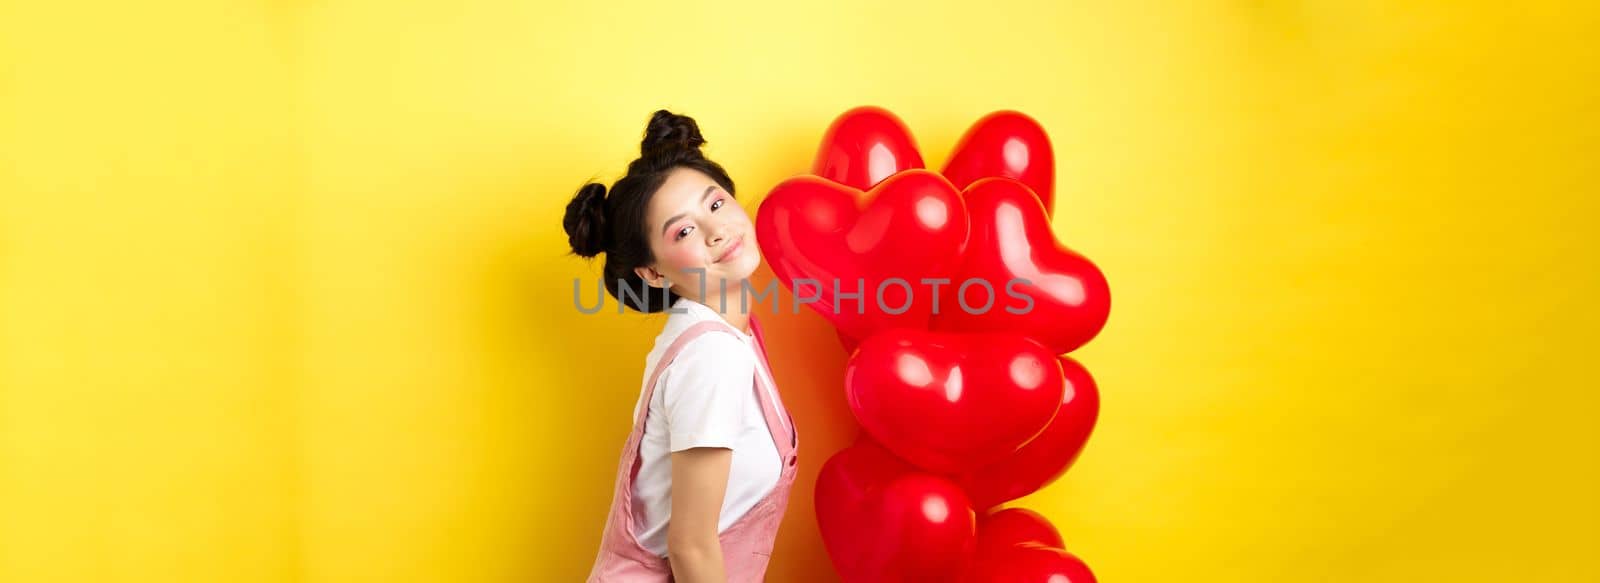 Valentines day concept. Stylish teenage asian girl posing near red hearts balloons, wear outfit for romantic date, standing happy on yellow background.